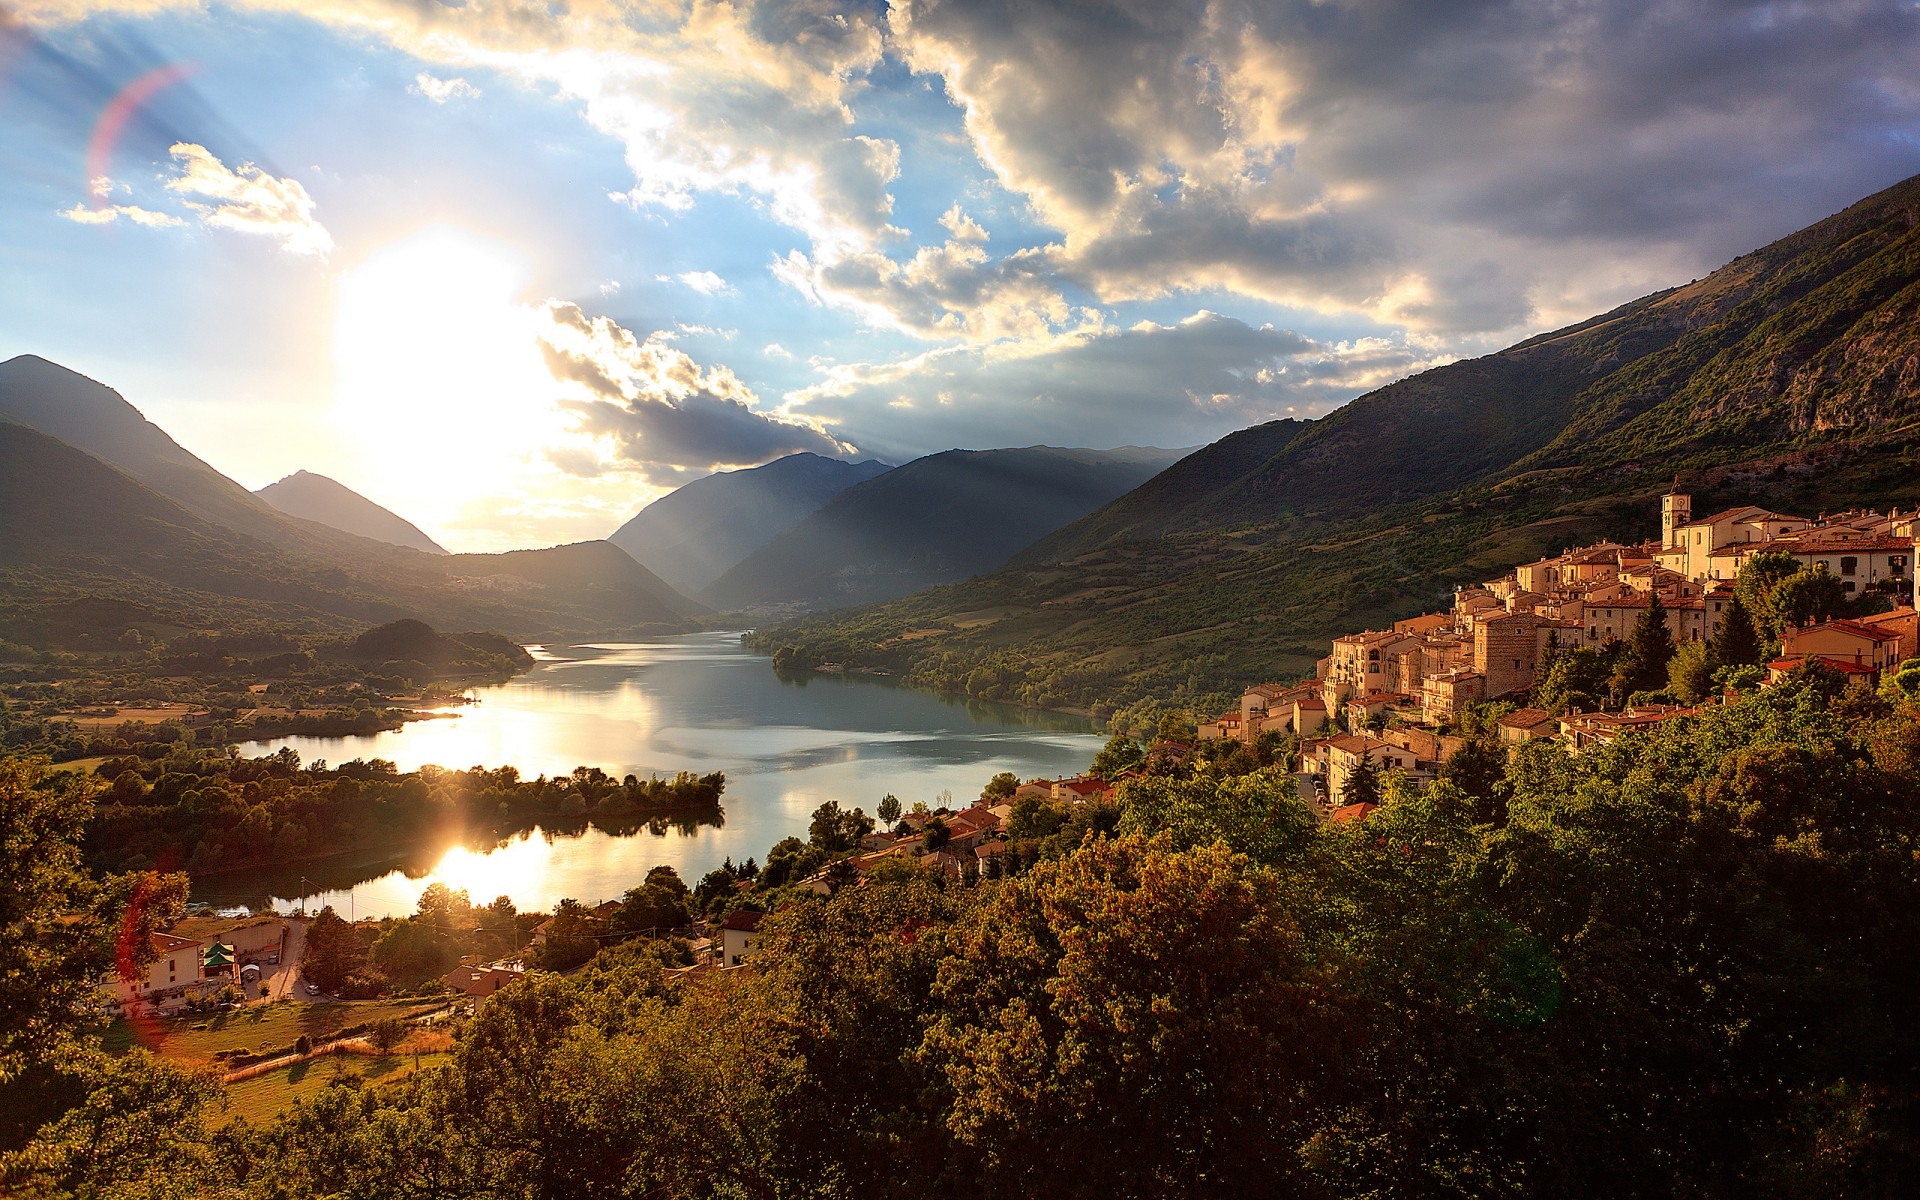 landscapes landscape mountain travel outdoors nature sky water sunset volcano fall hill scenic tree lake town italy